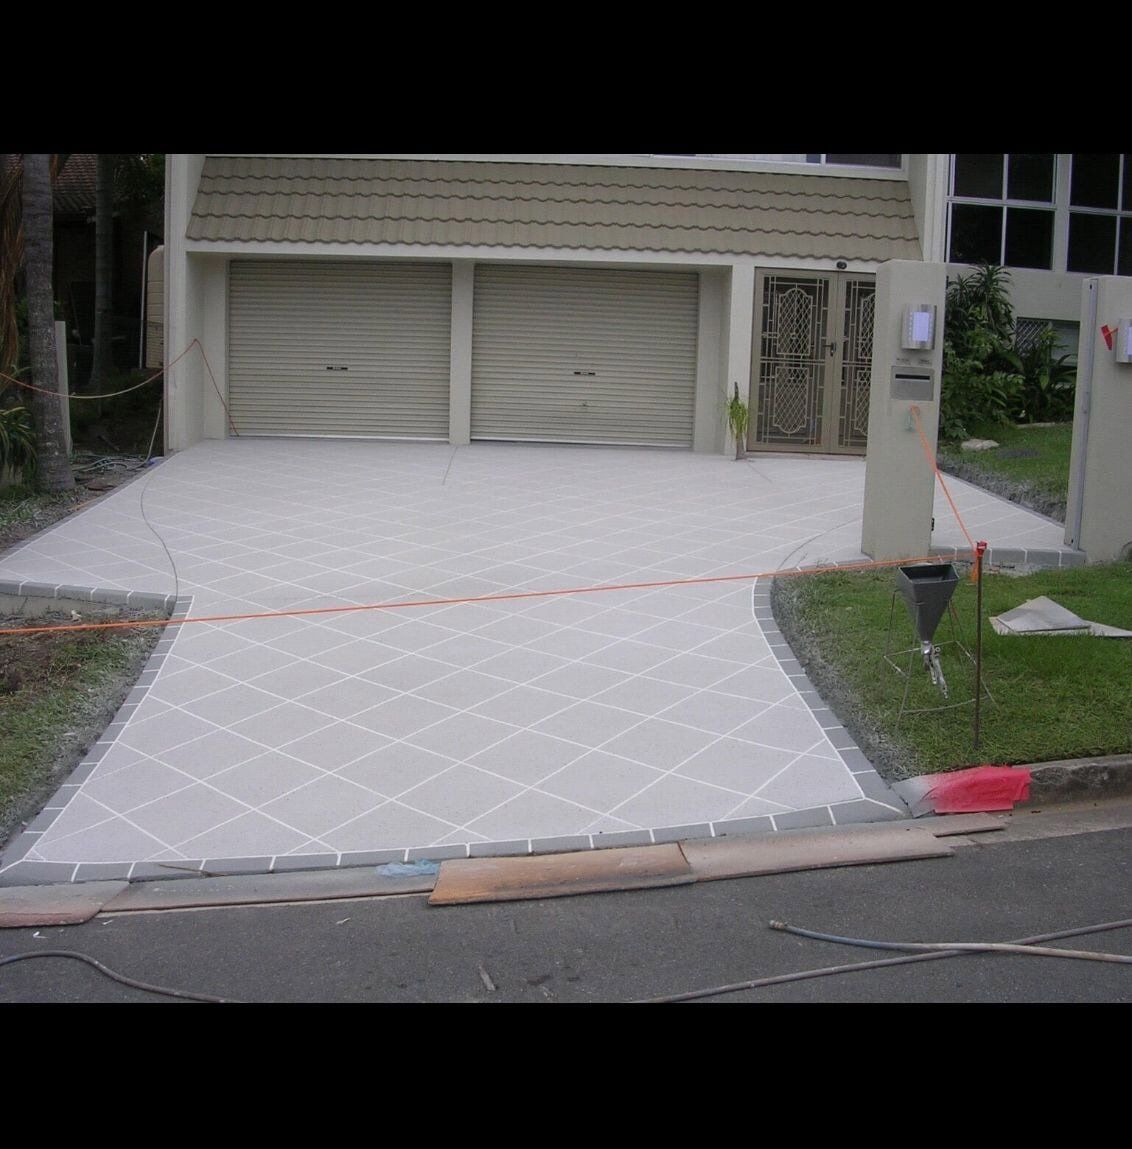 Driveways Under Construction — River2Coast Concreting In Coffs Harbour Jetty, NSW